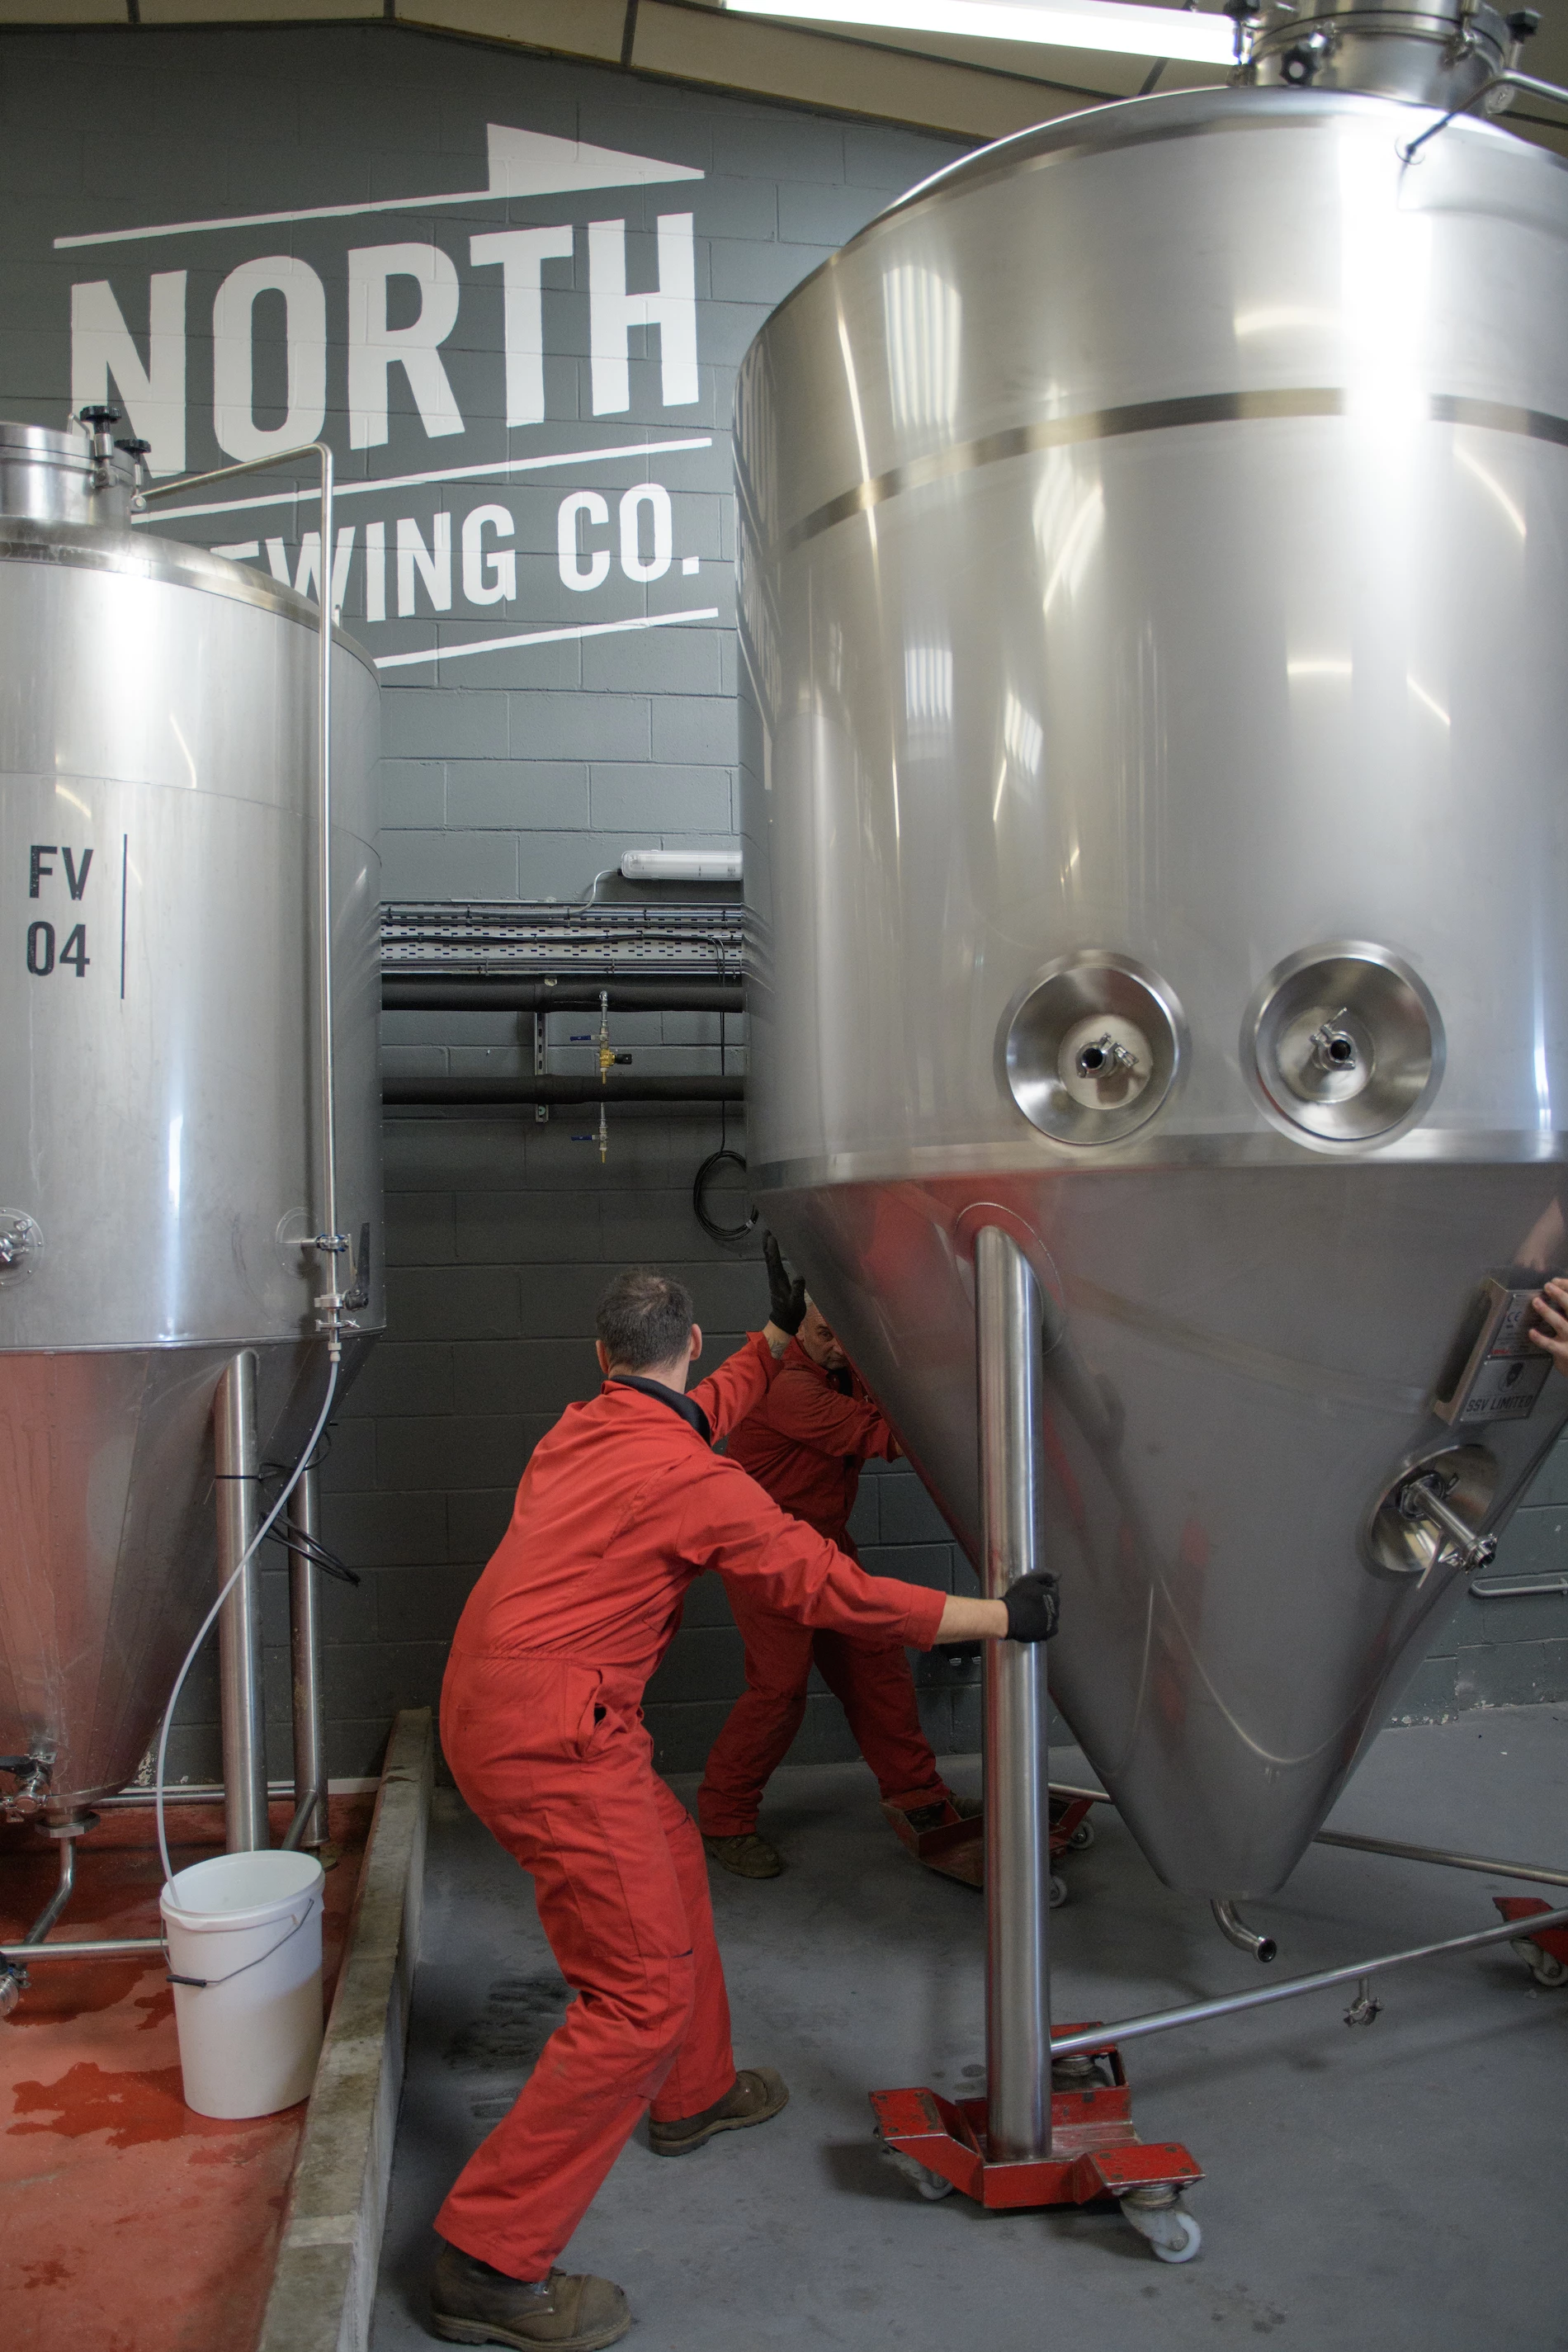 North Brewing Co was among a mission of 60 British producers and distributors led by the Department for International Trade (DIT).